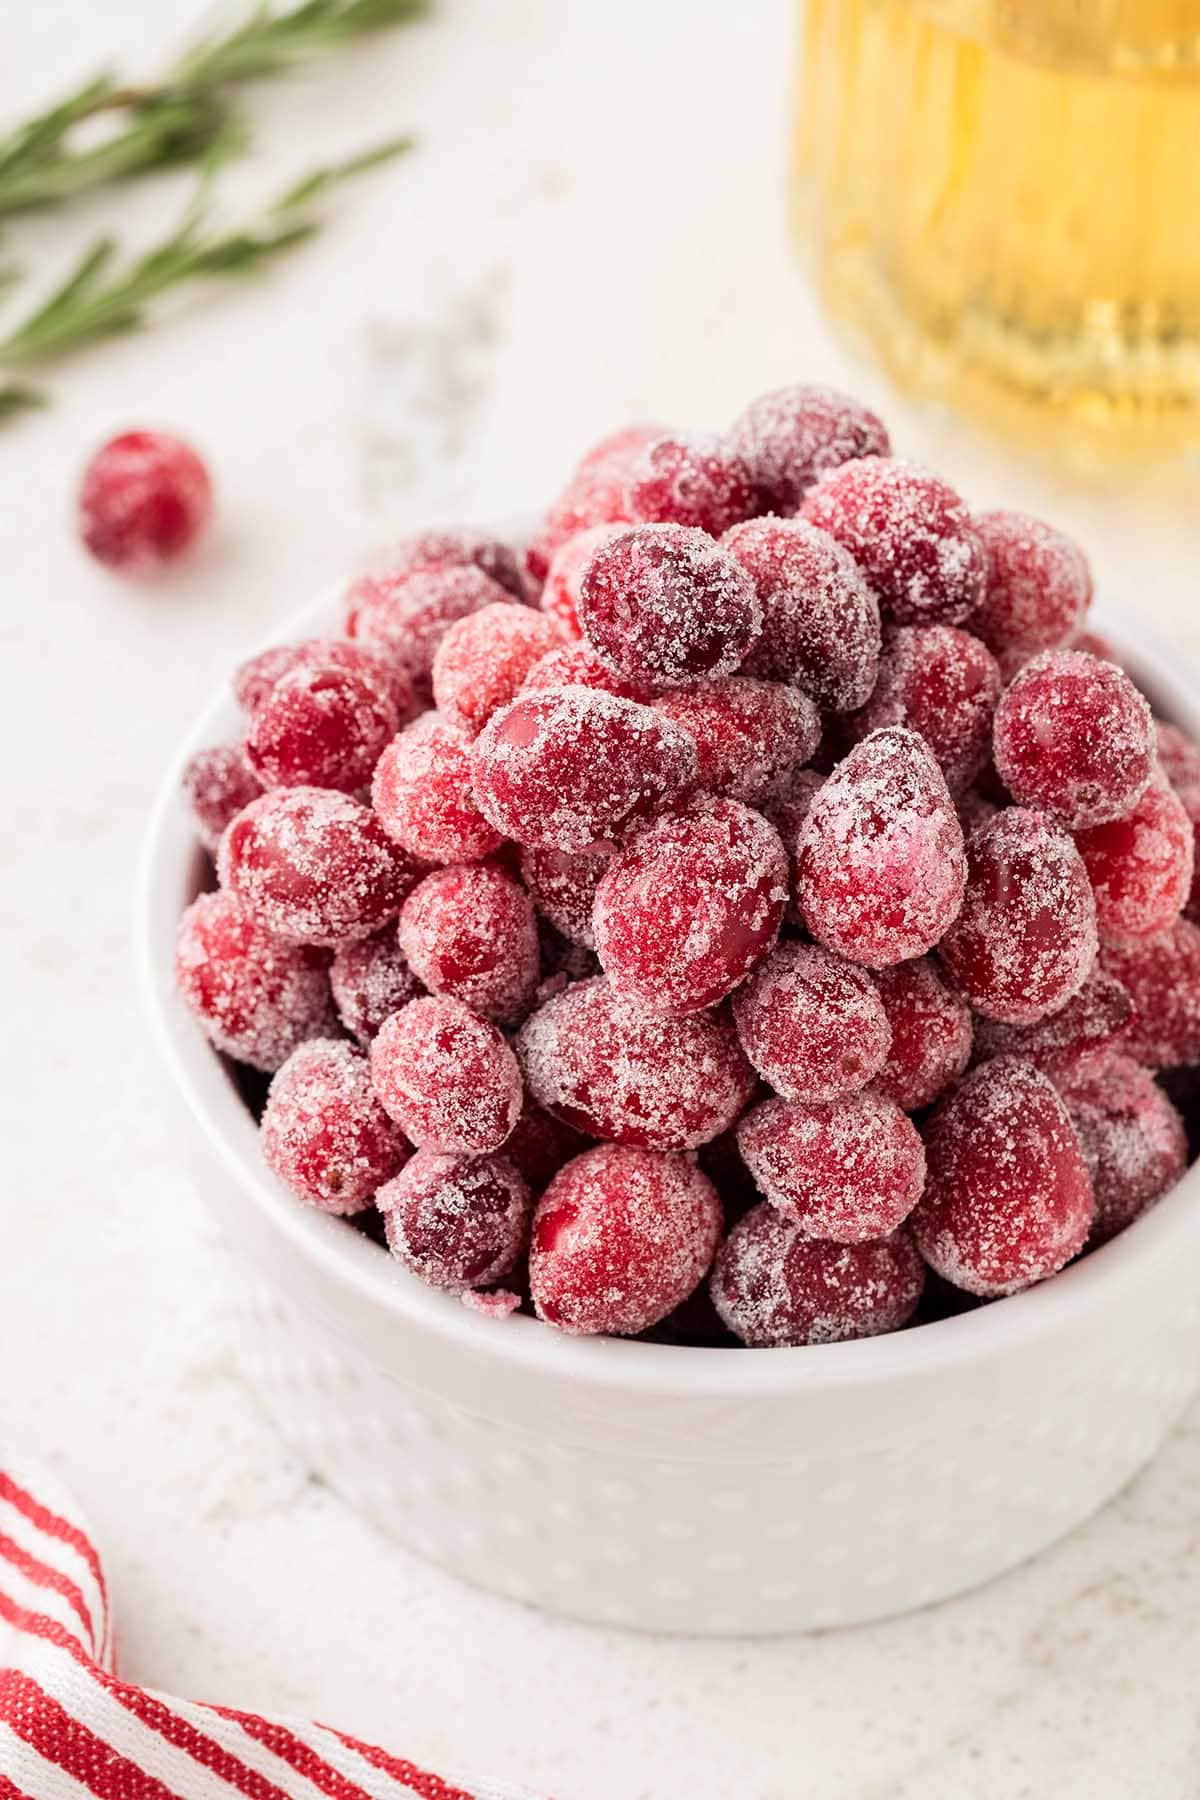 Sugared Cranberries on a white table with a glass of beverage in the background.